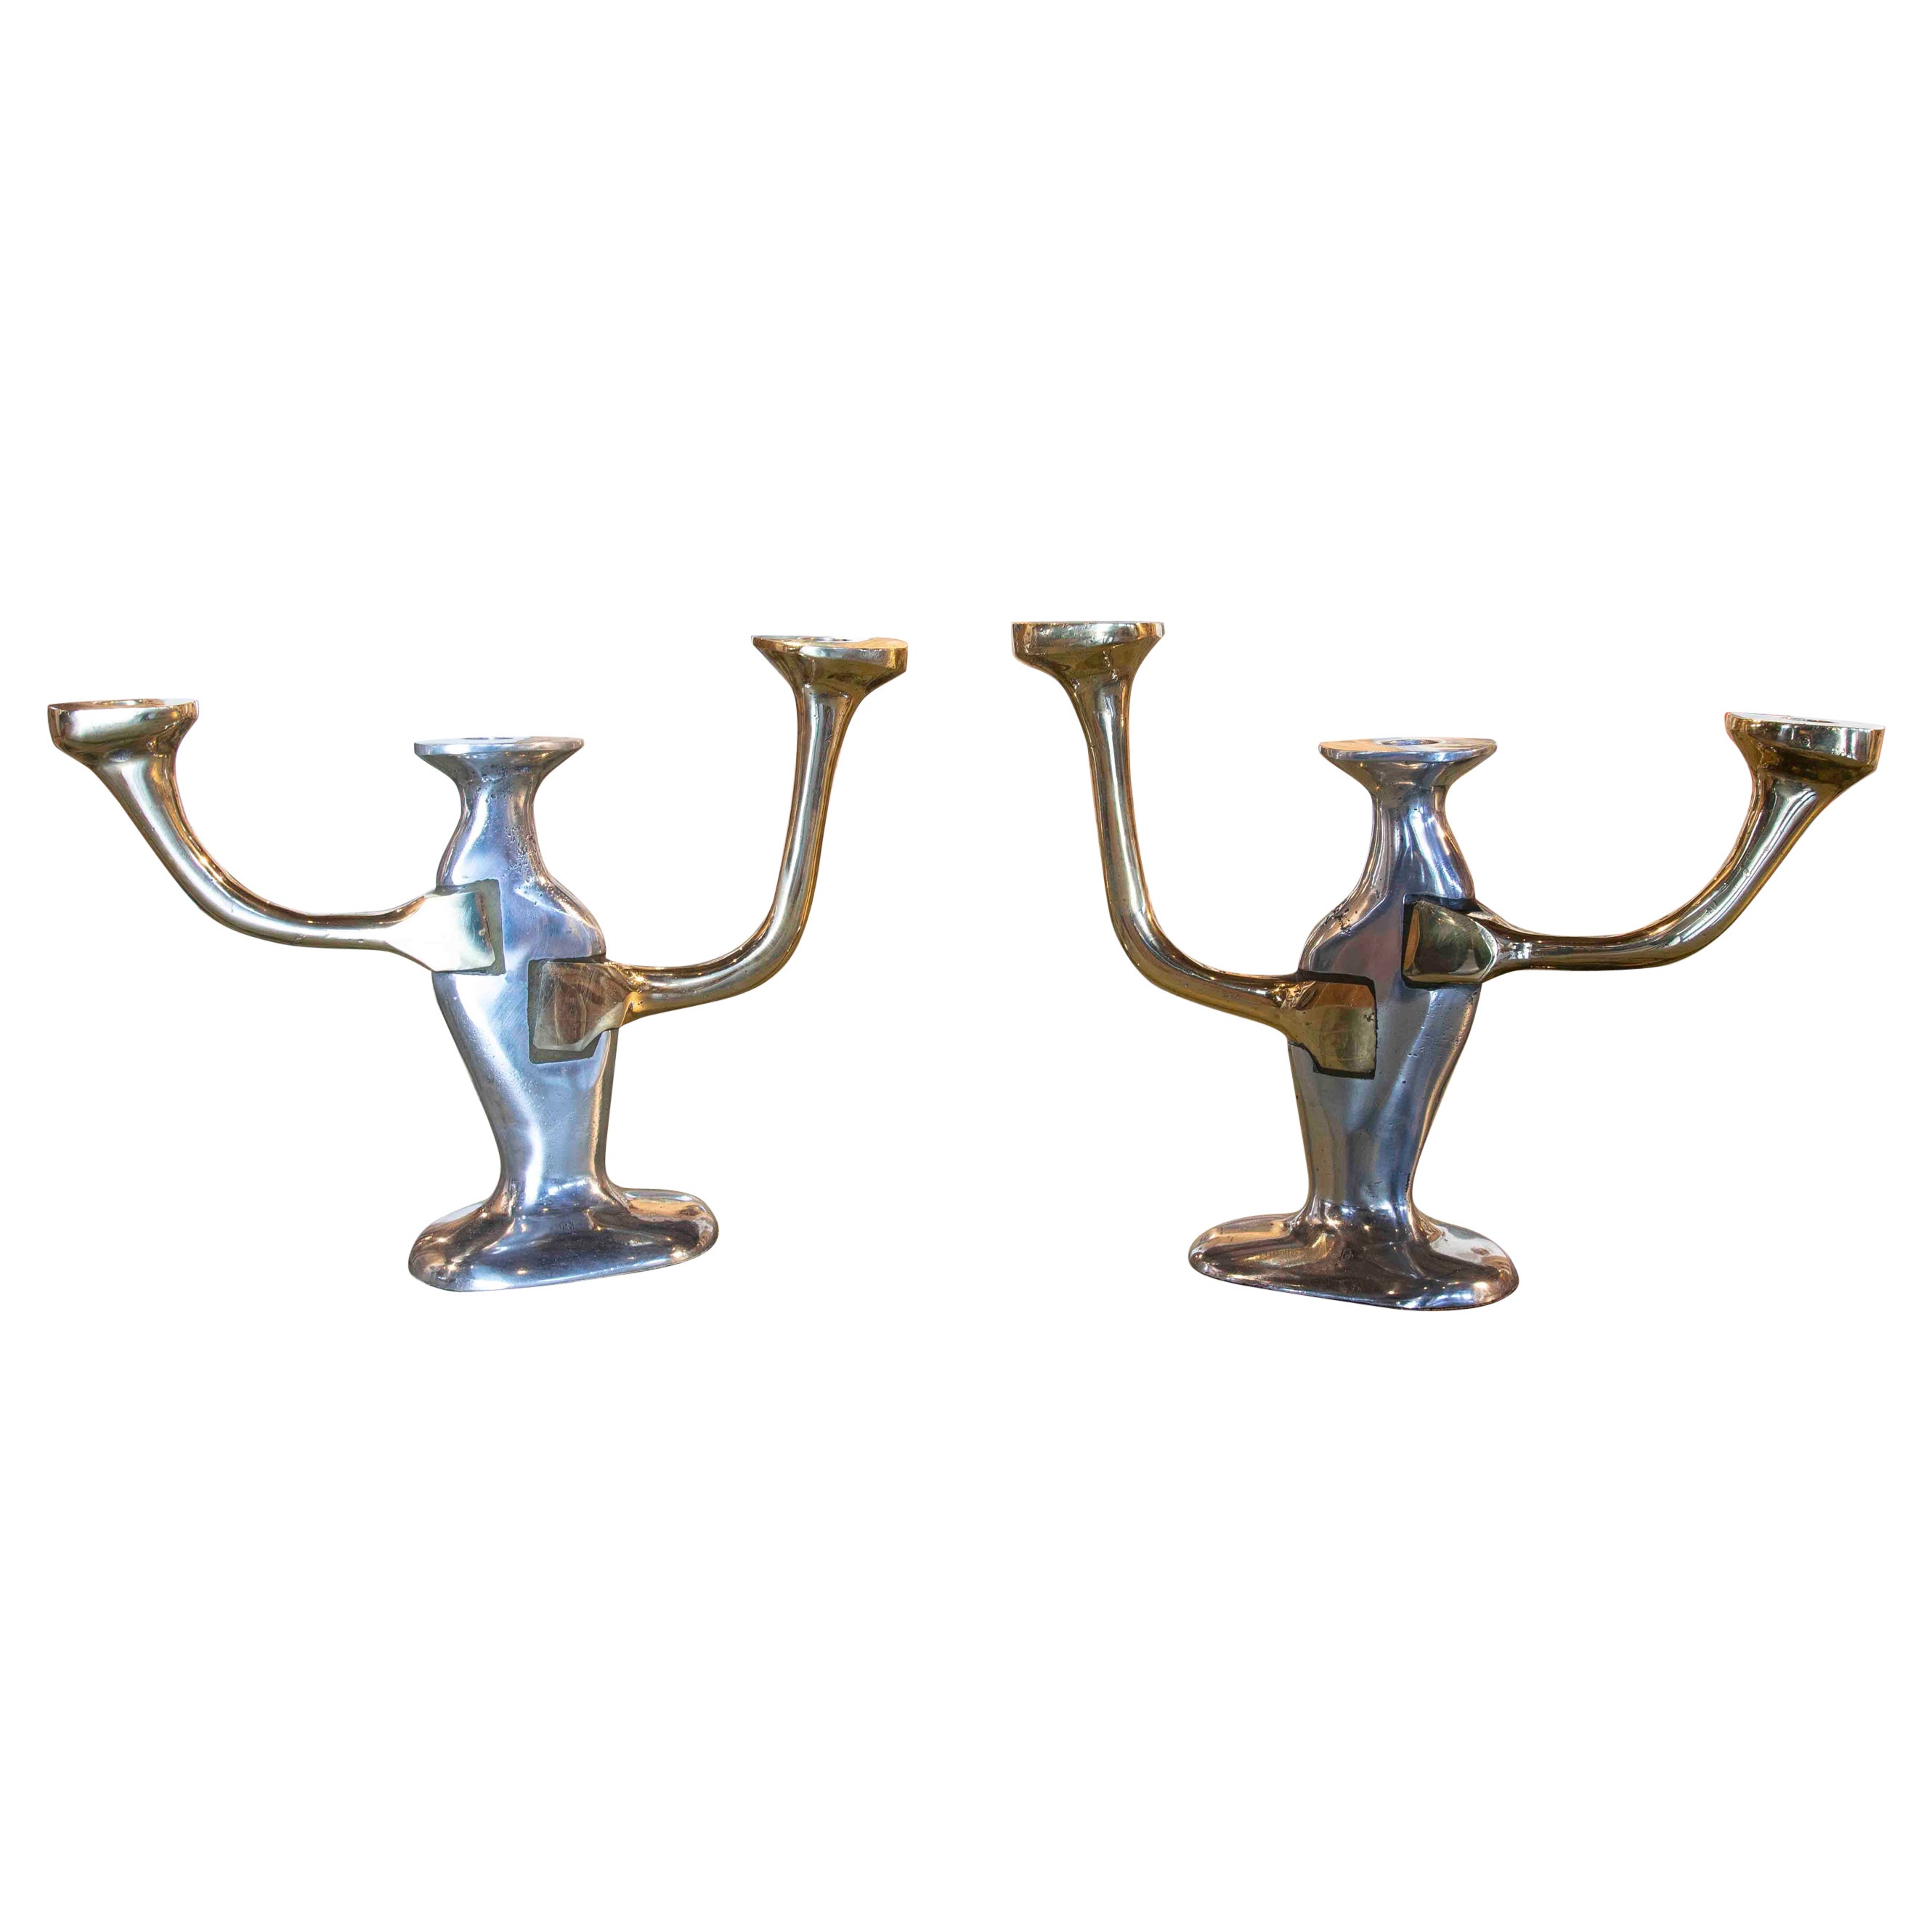 1980s Pair of Bronze Candlesticks by the Artist David Marshall